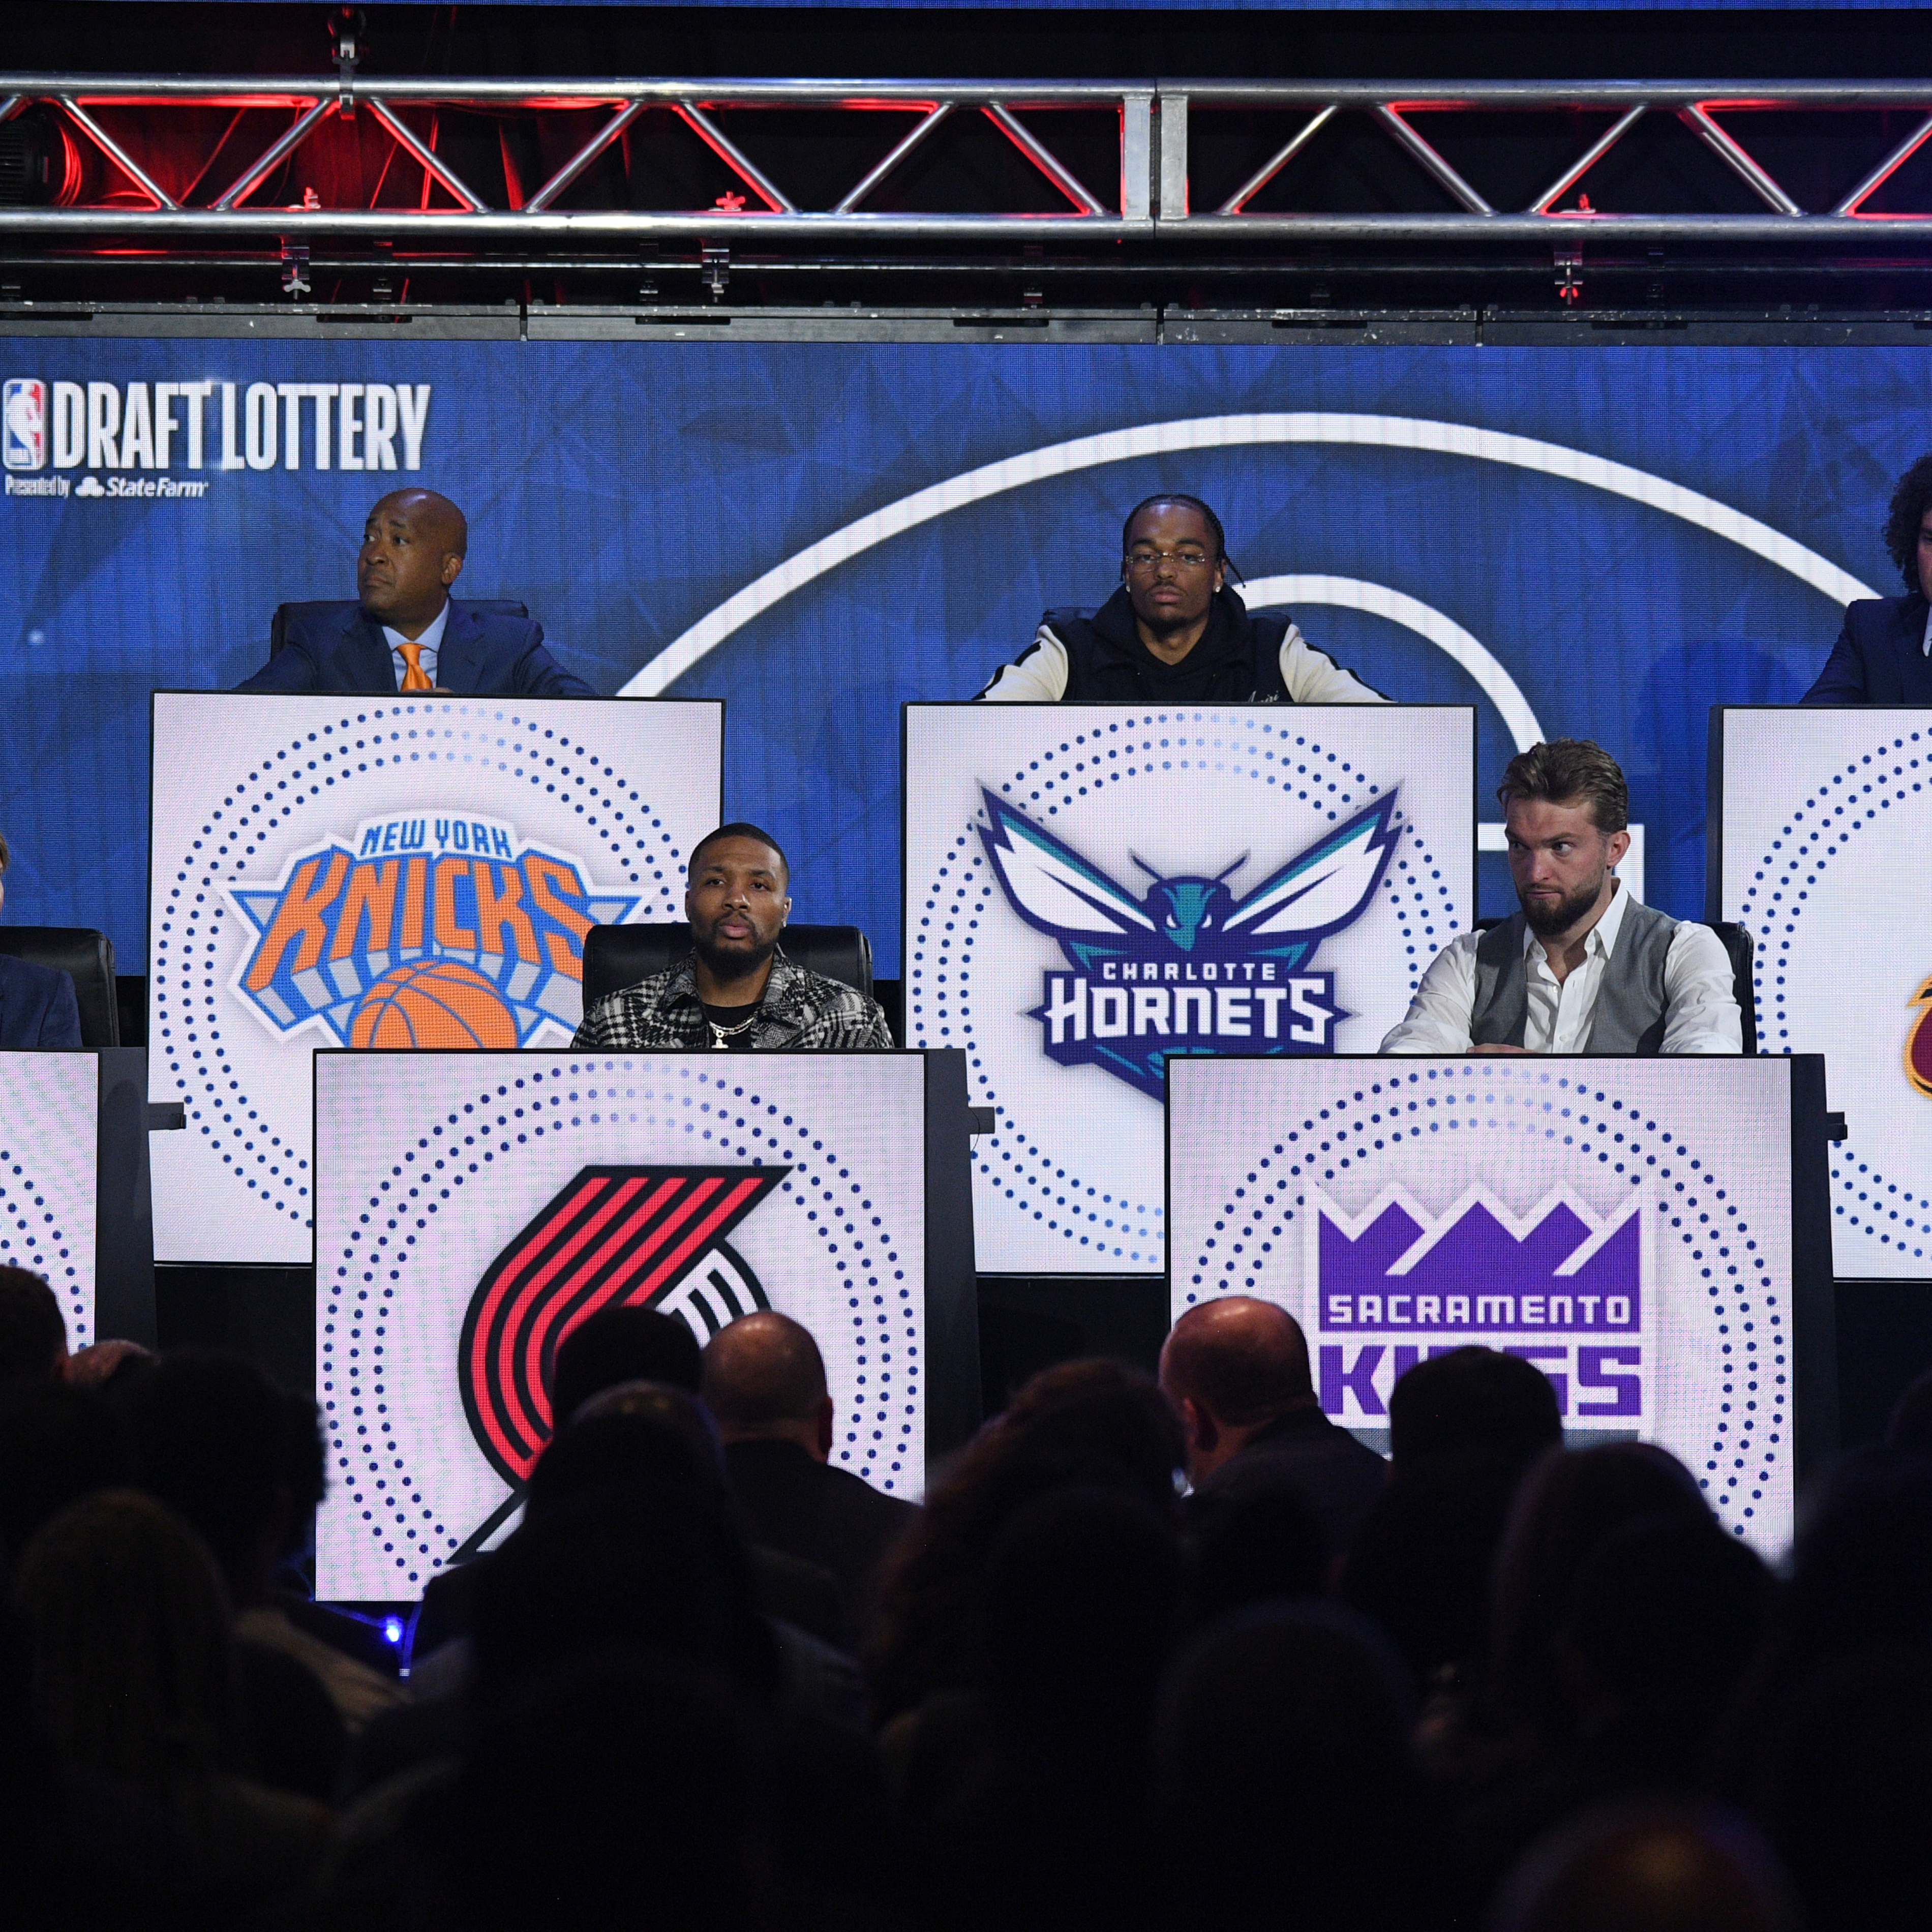 NBA Rumors: Blazers, Kings ‘Widely Expected’ to Entertain Win-Now Trades at Draft